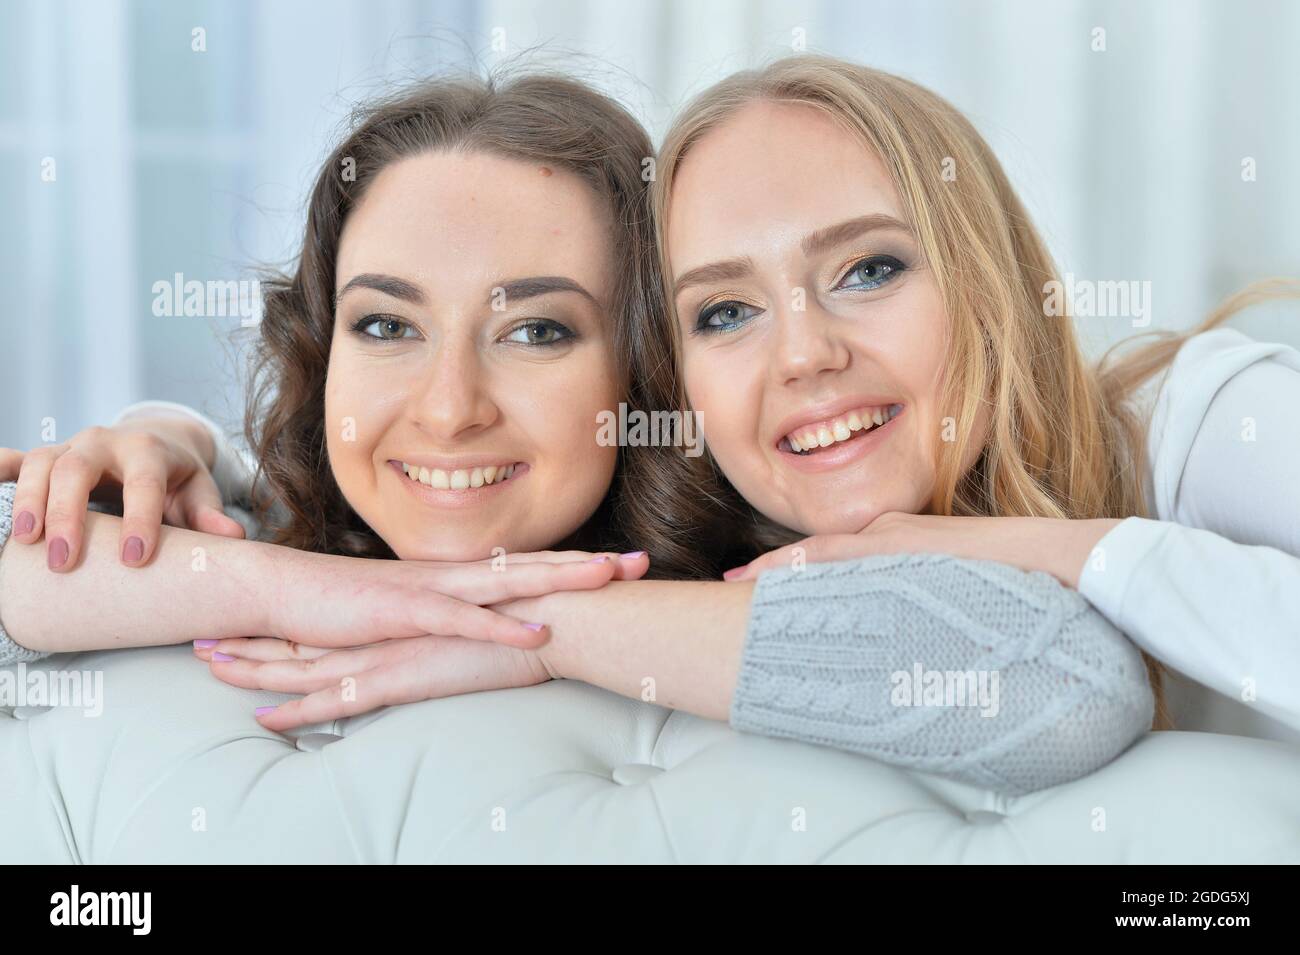 Beautiful young women hugging and looking at camera, friendship concept Stock Photo